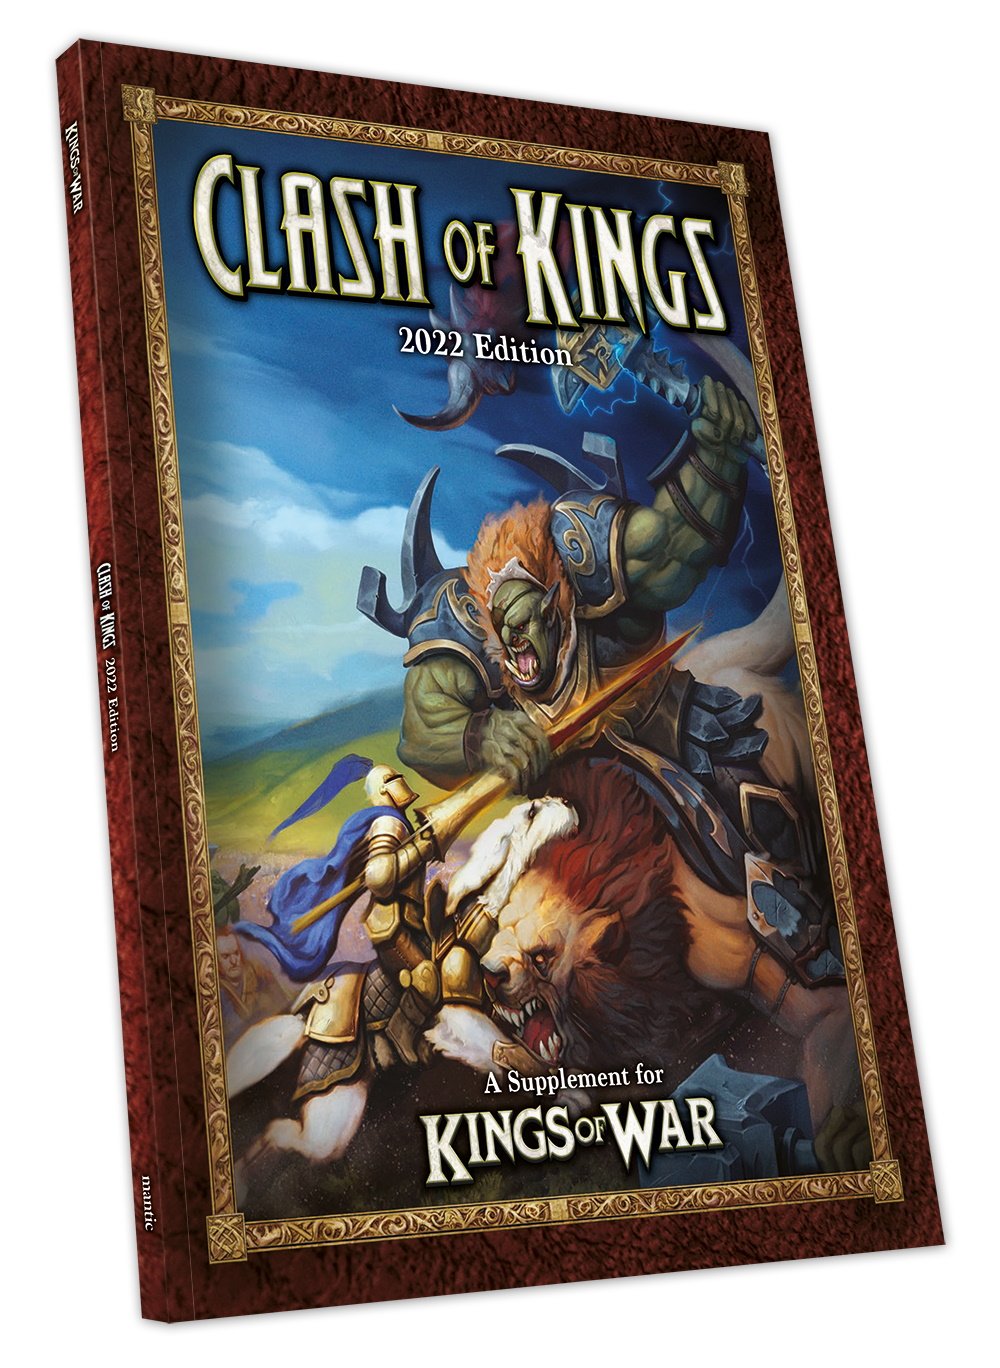 Clash of Kings book cover